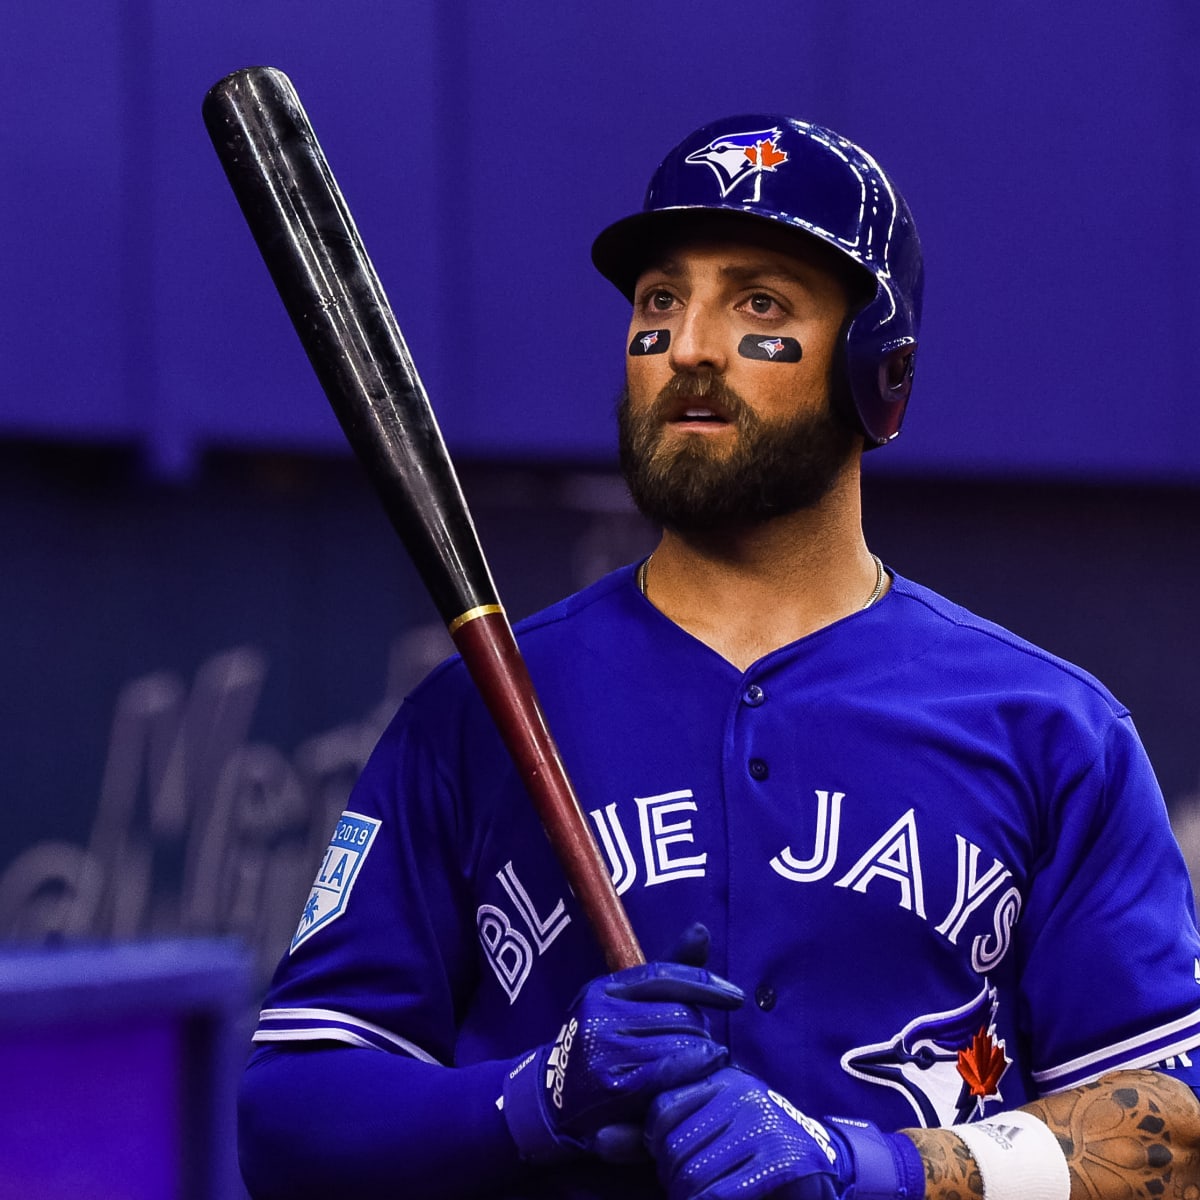 Blue Jays trade Kevin Pillar to Giants for three players - Sports